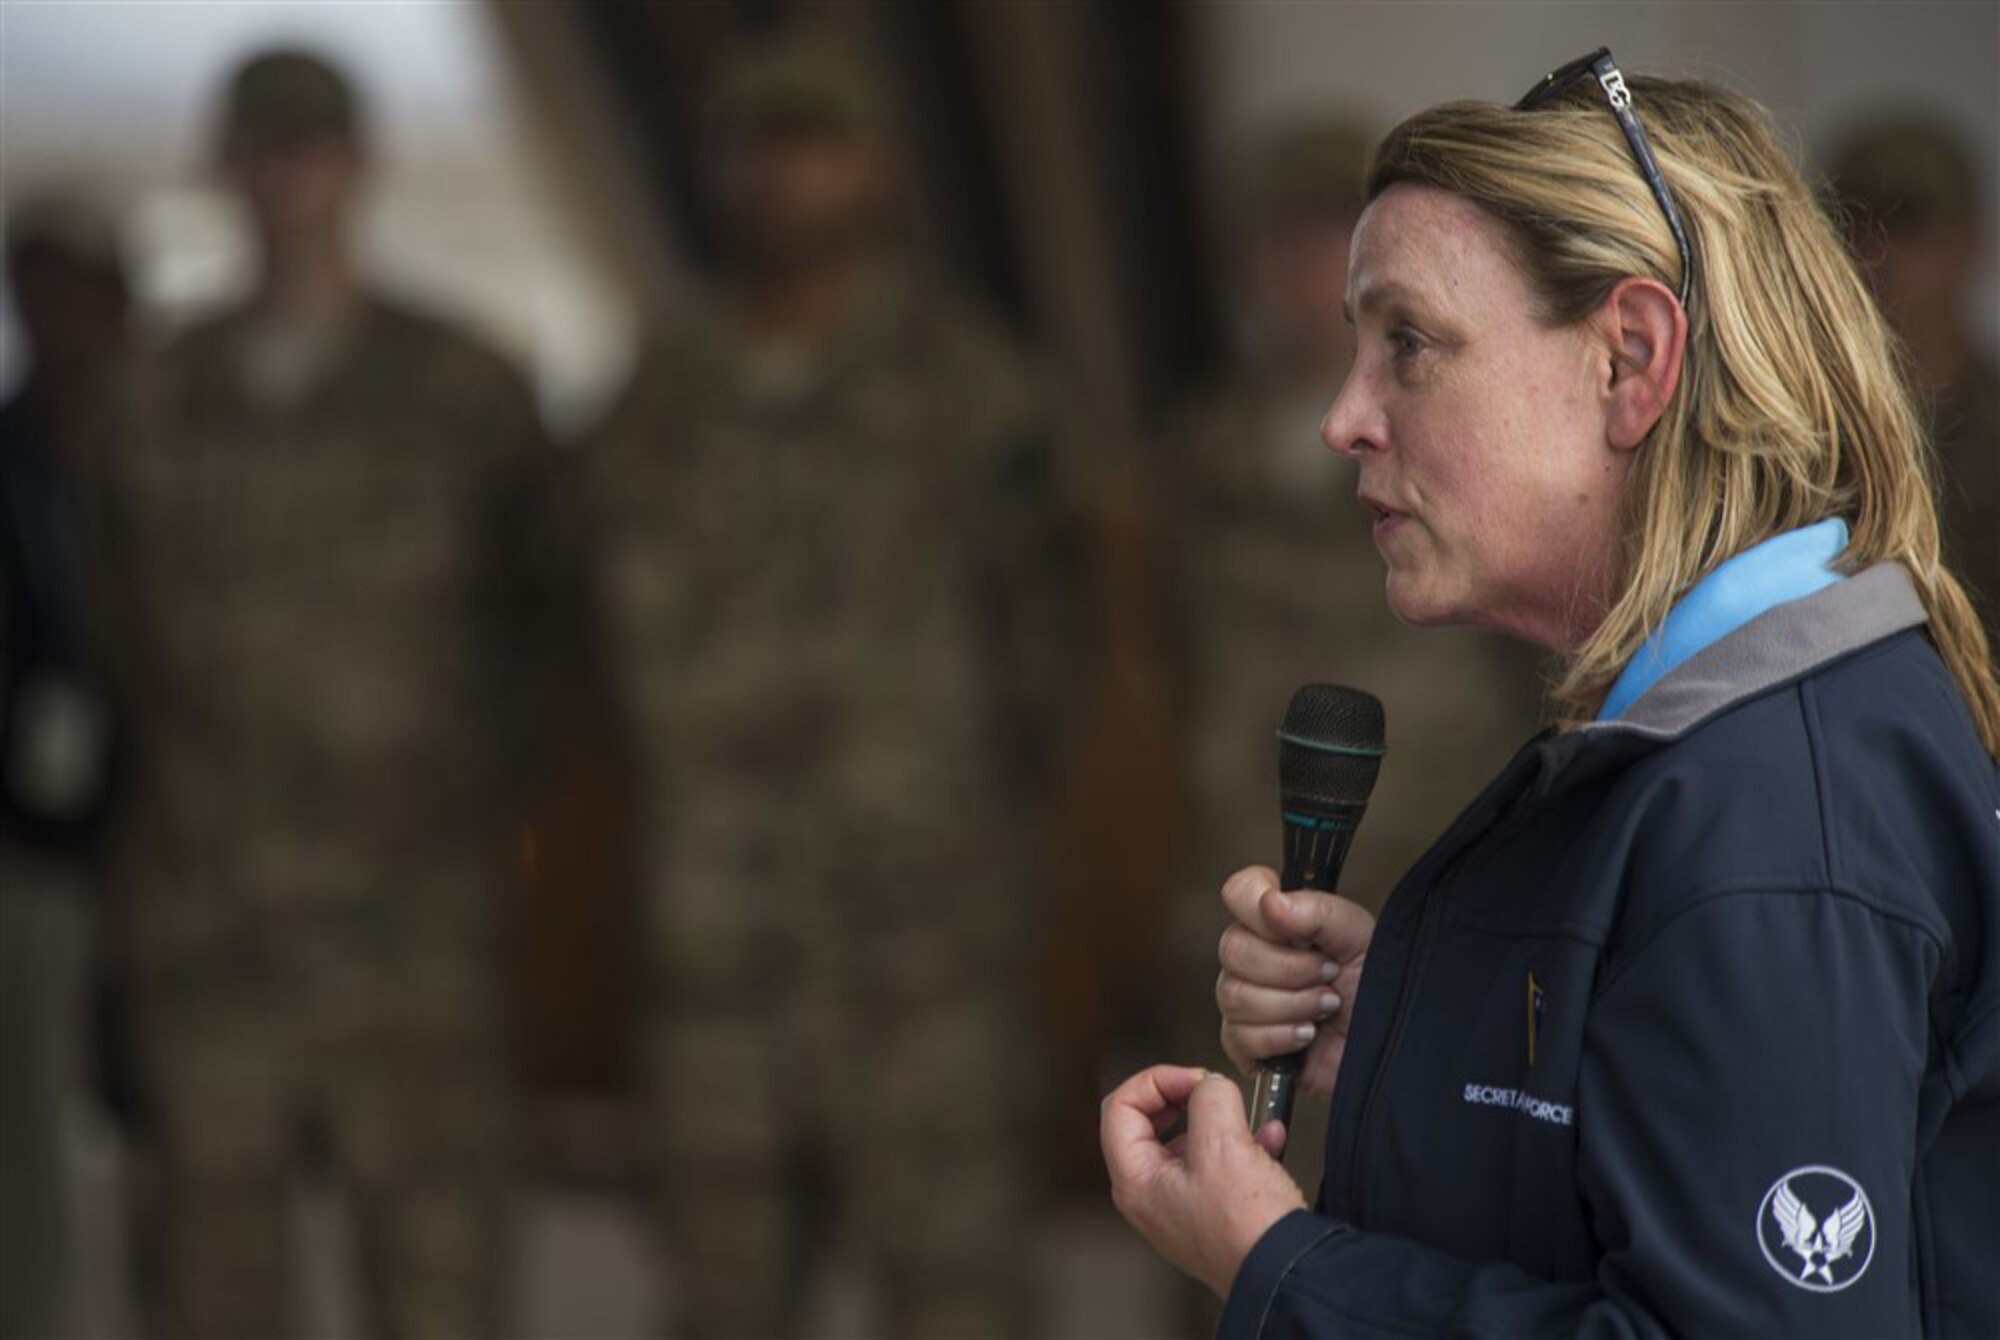 Secretary of the Air Force Deborah Lee James speaks to a group of Airmen at Chebelley Airfield, Djibouti, Nov. 12, 2015. During her visit, James spoke at an all call where she answered Airmen's questions and provided updates about current issues around the Air Force. (U.S. Air Force photo/Senior Airman Peter Thompson)